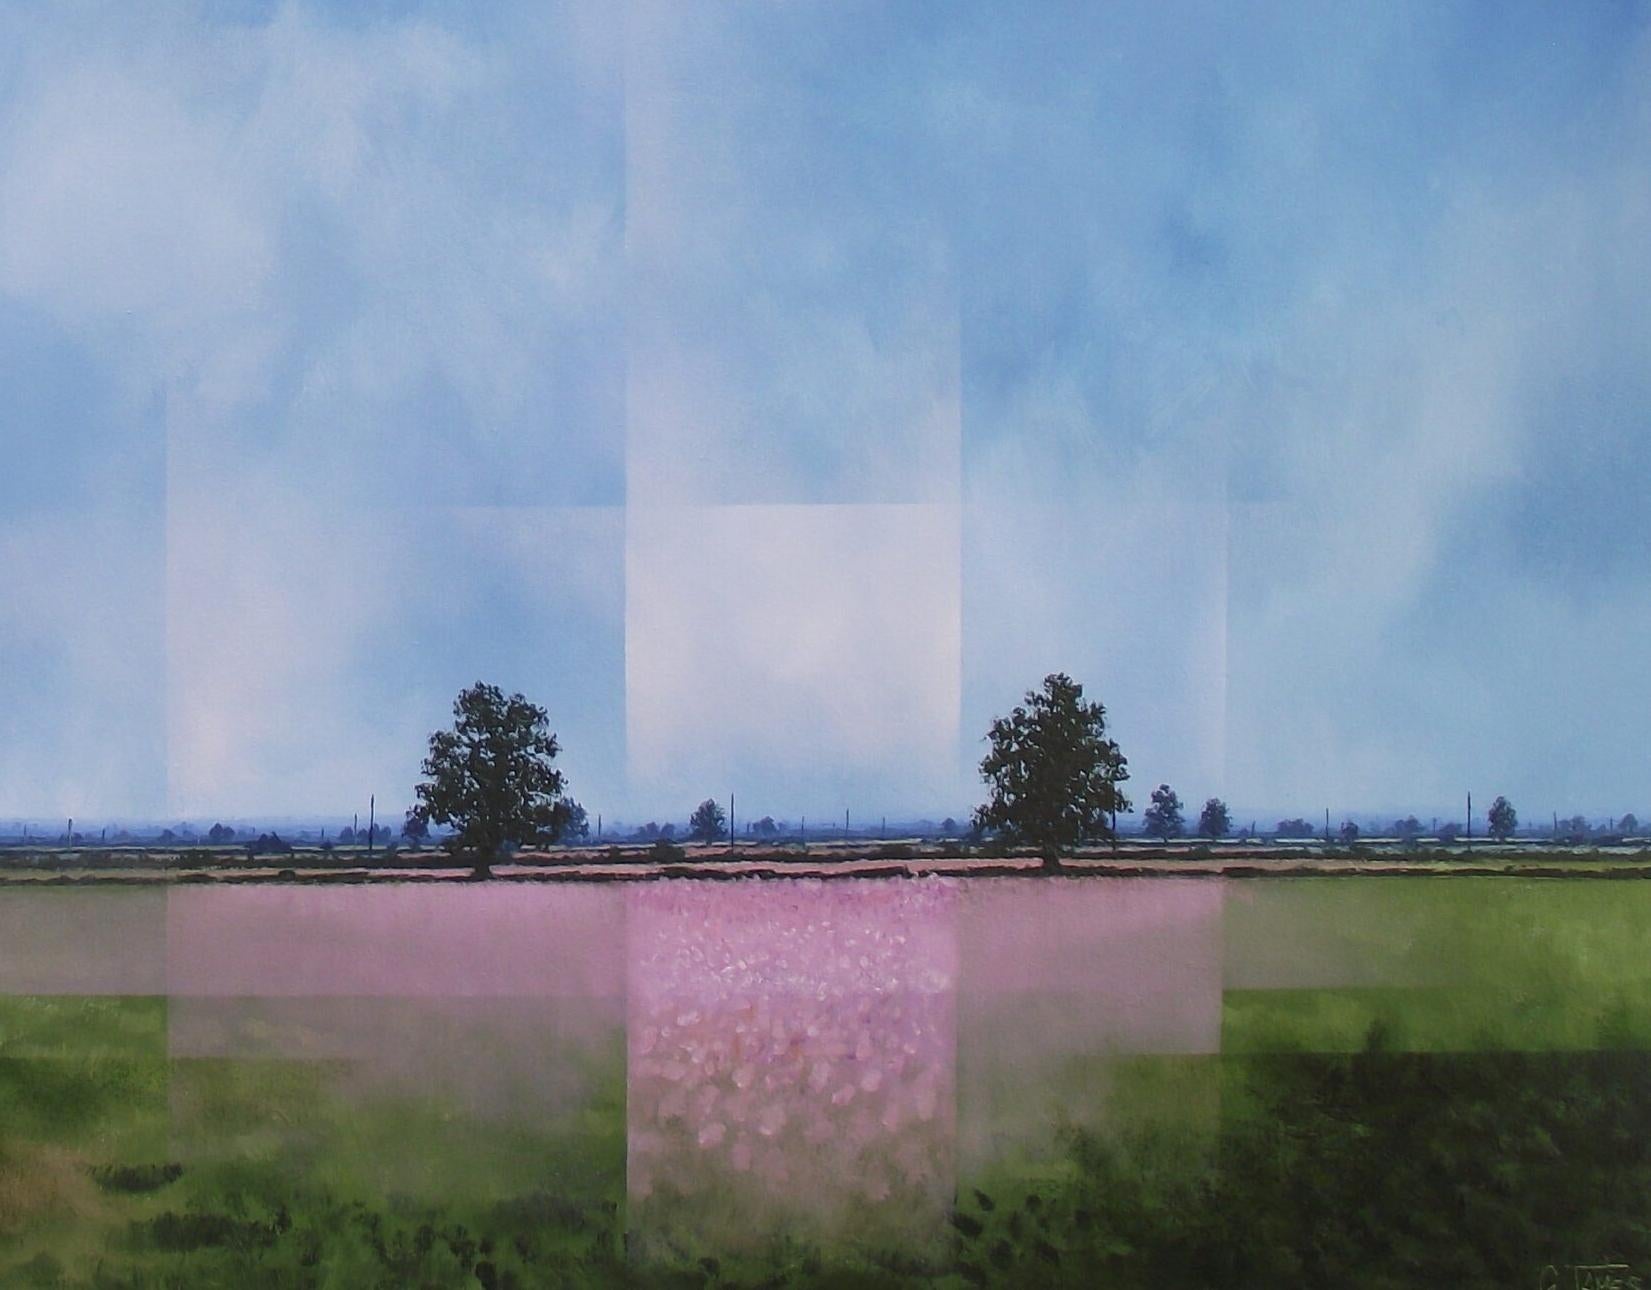 We're in the Pink Now - English Countryside/Landscape: Oil on Canvas - Painting by Glynne James